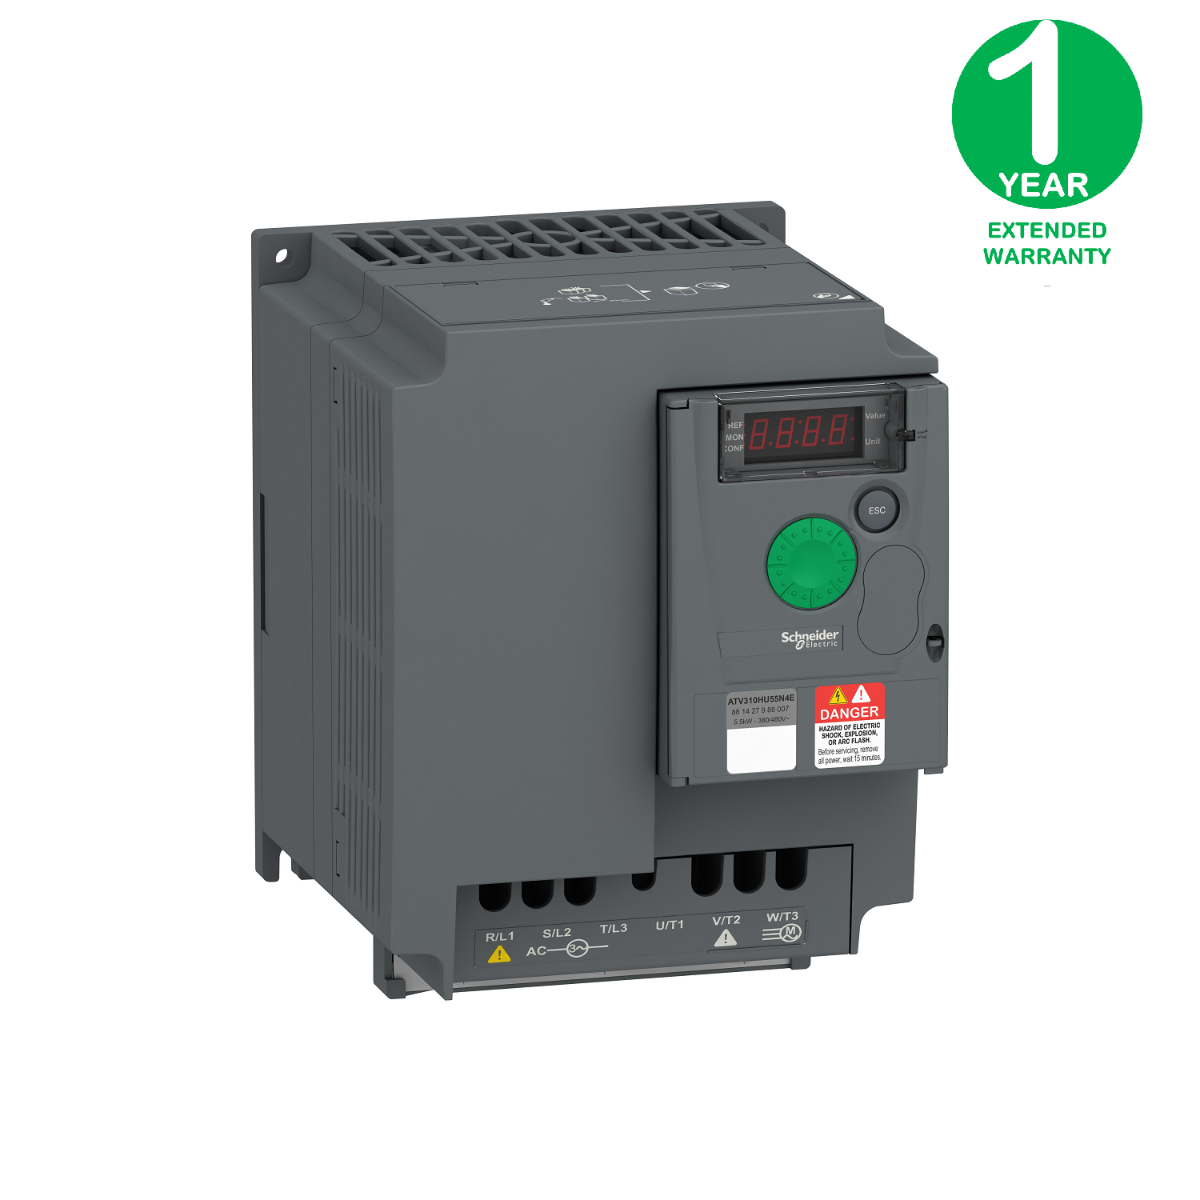 variable speed drive ATV310, 5.5 kW, 7.5 hp, 380...460 V, 3 phase, without filter + Extended Warranty 1 year